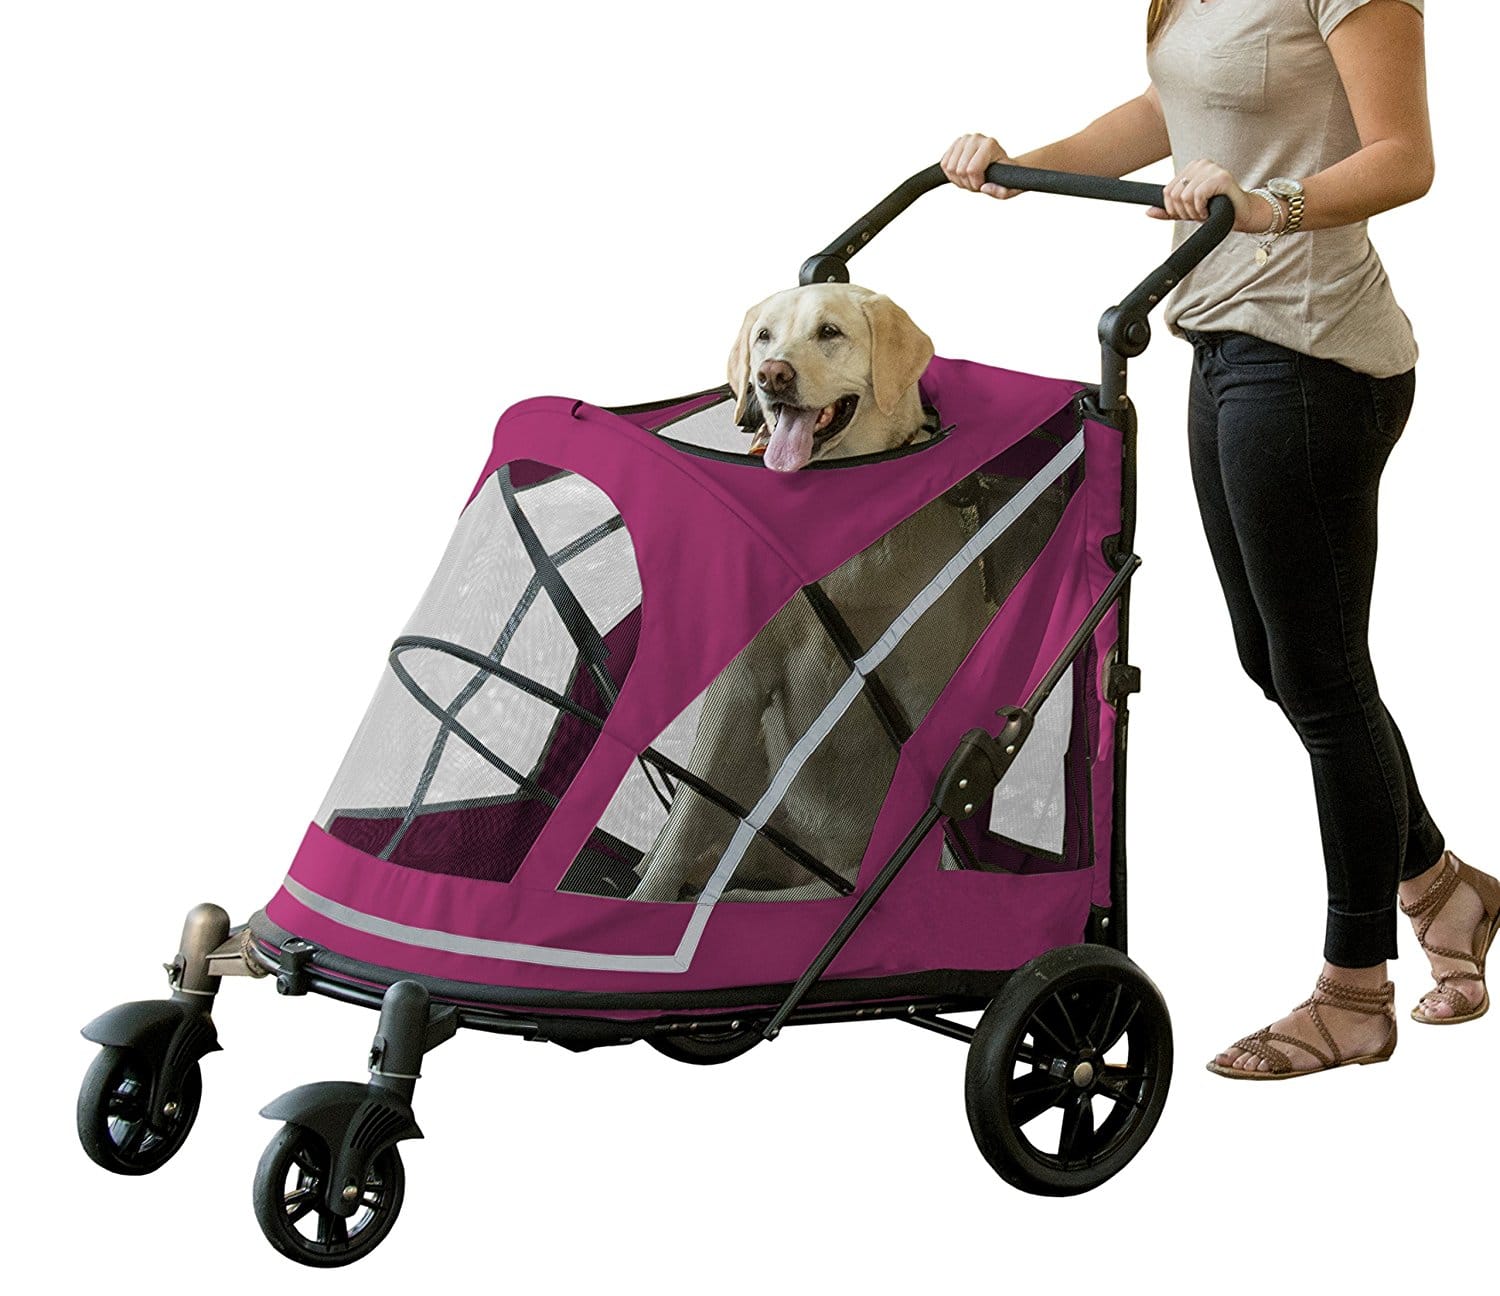 The 10 Large Dog Strollers for Pets (Review 2020)